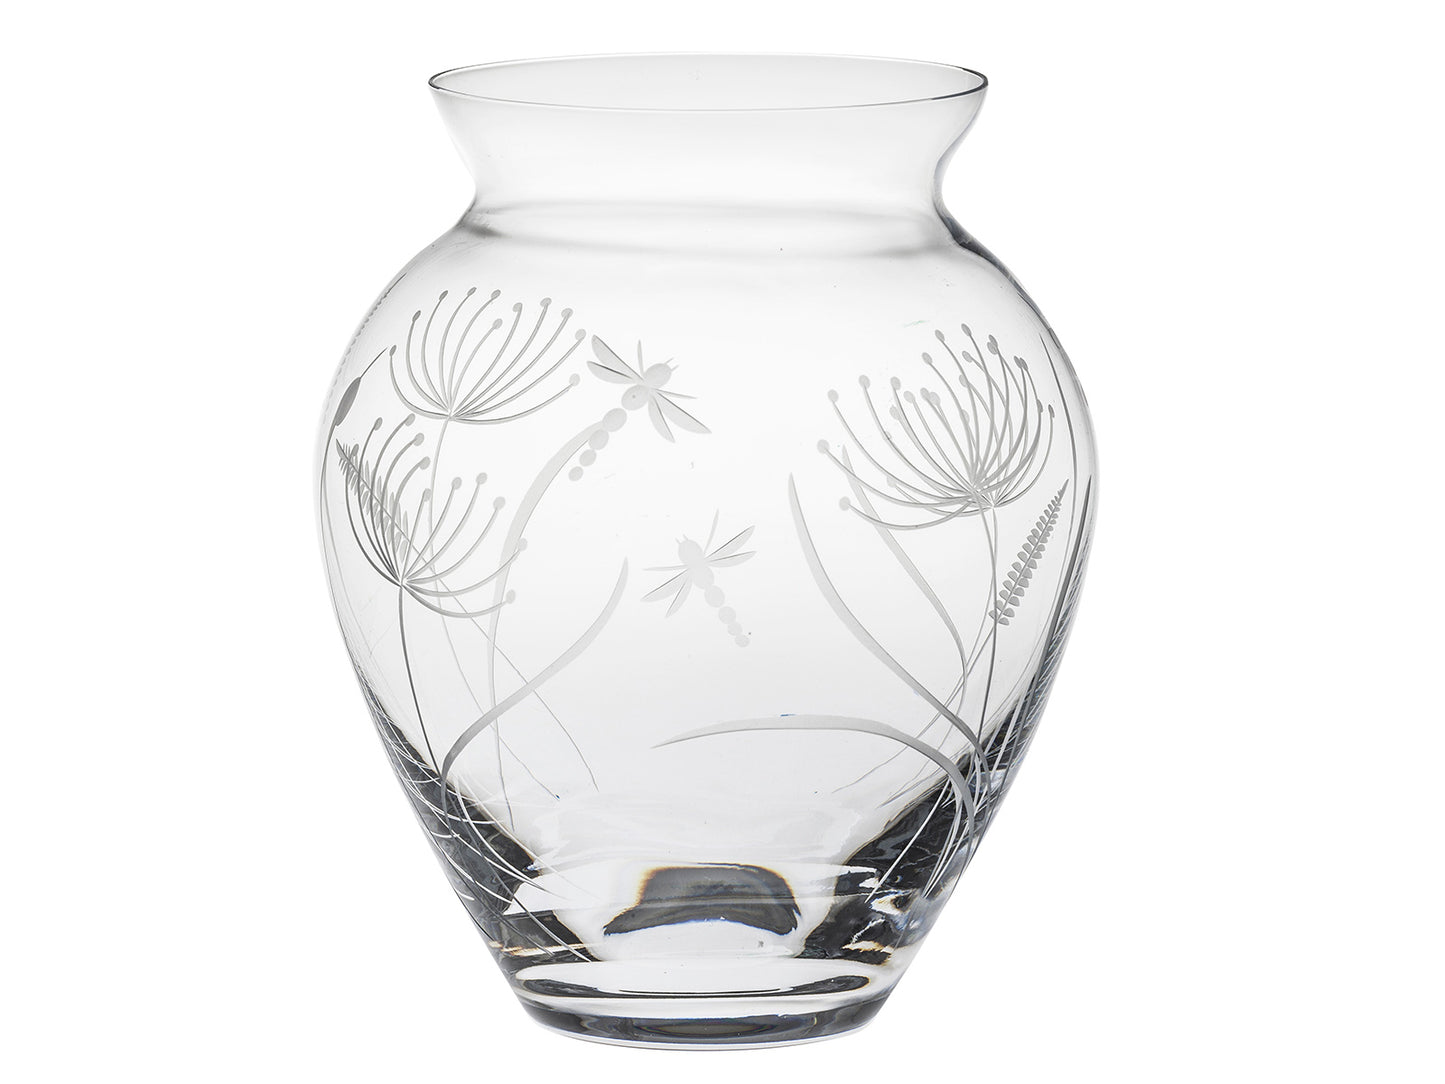 Royal Scot Crystal Dragonfly Vase - Posy / Large is hand-crafted in the UK of the finest crystal, engraved with the Sanderson print of daffodils and bulrushes, with two dragonflies dotted amongst them. The vase has a bulbous body that tapers into a slimmer neck to place flowers into.